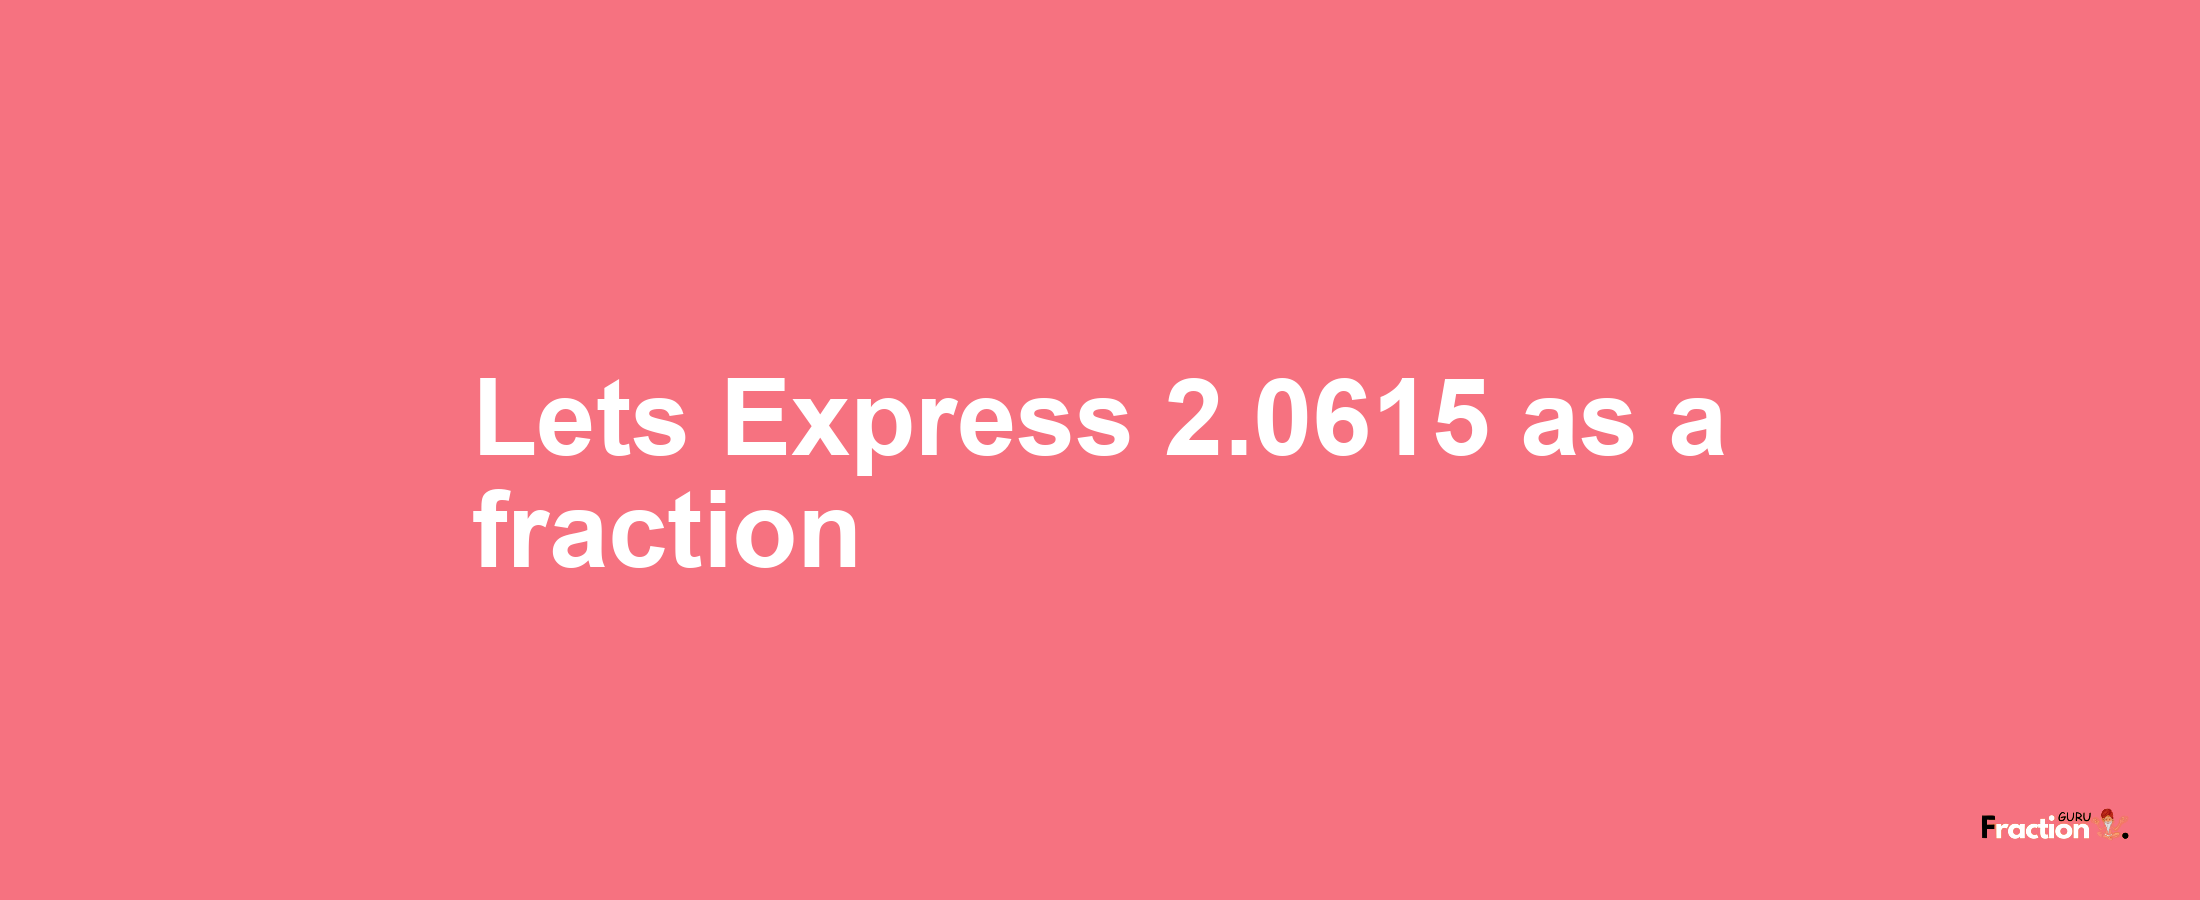 Lets Express 2.0615 as afraction